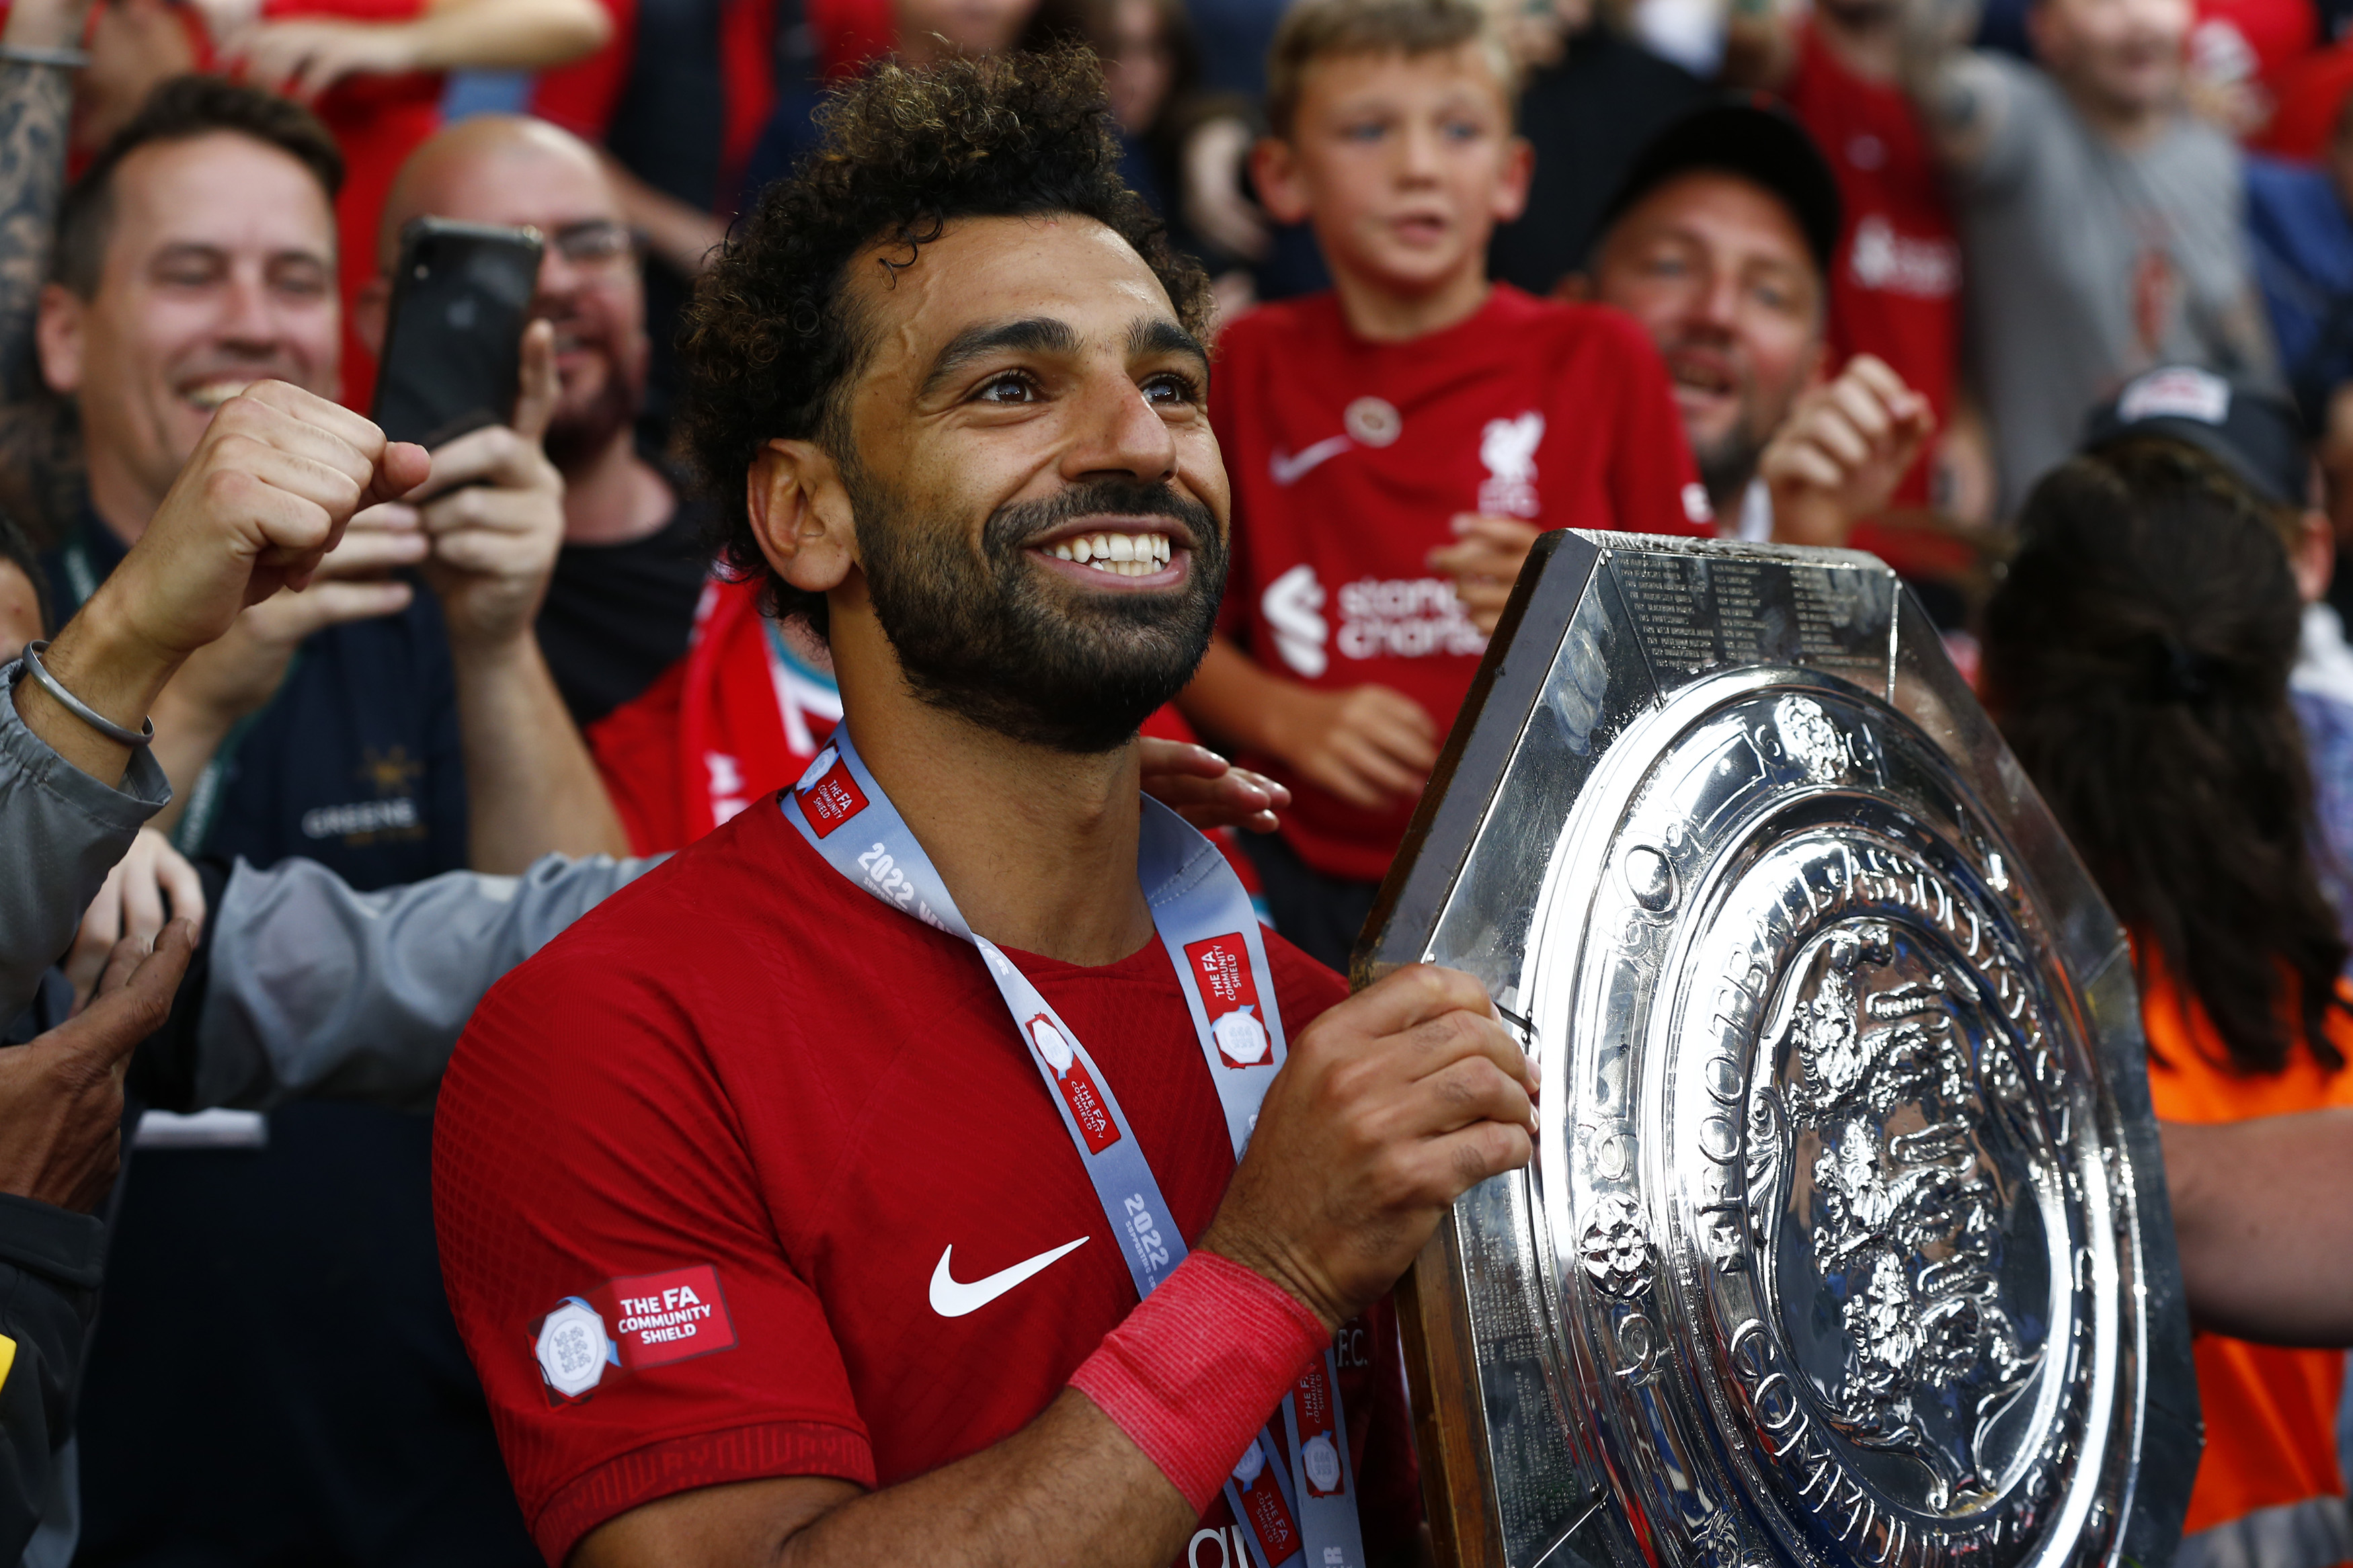 Mohamed Salah lifts the The FA Community Shield - Liverpool - Premier League